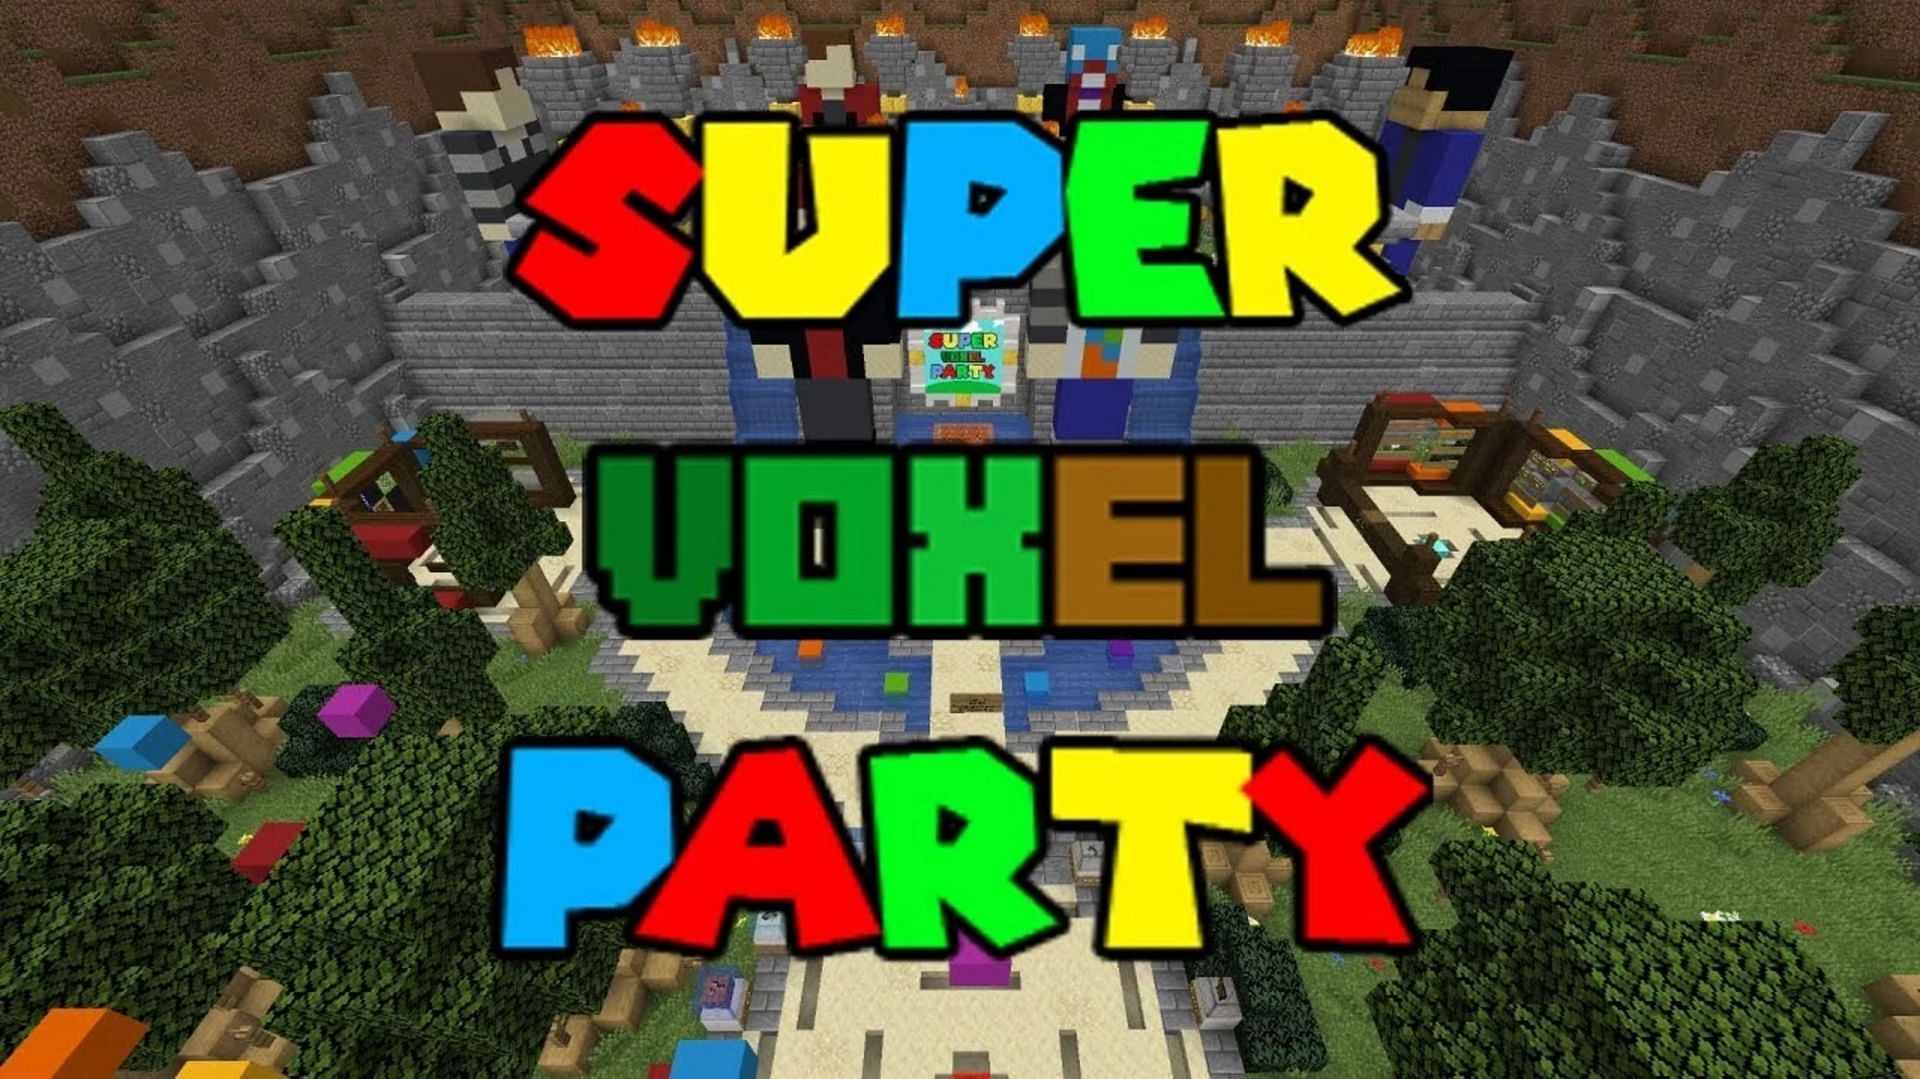 Super Voxel Party is a minigame map based on Mario Party (Image via TheNerdyGinger/PlanetMinecraft)